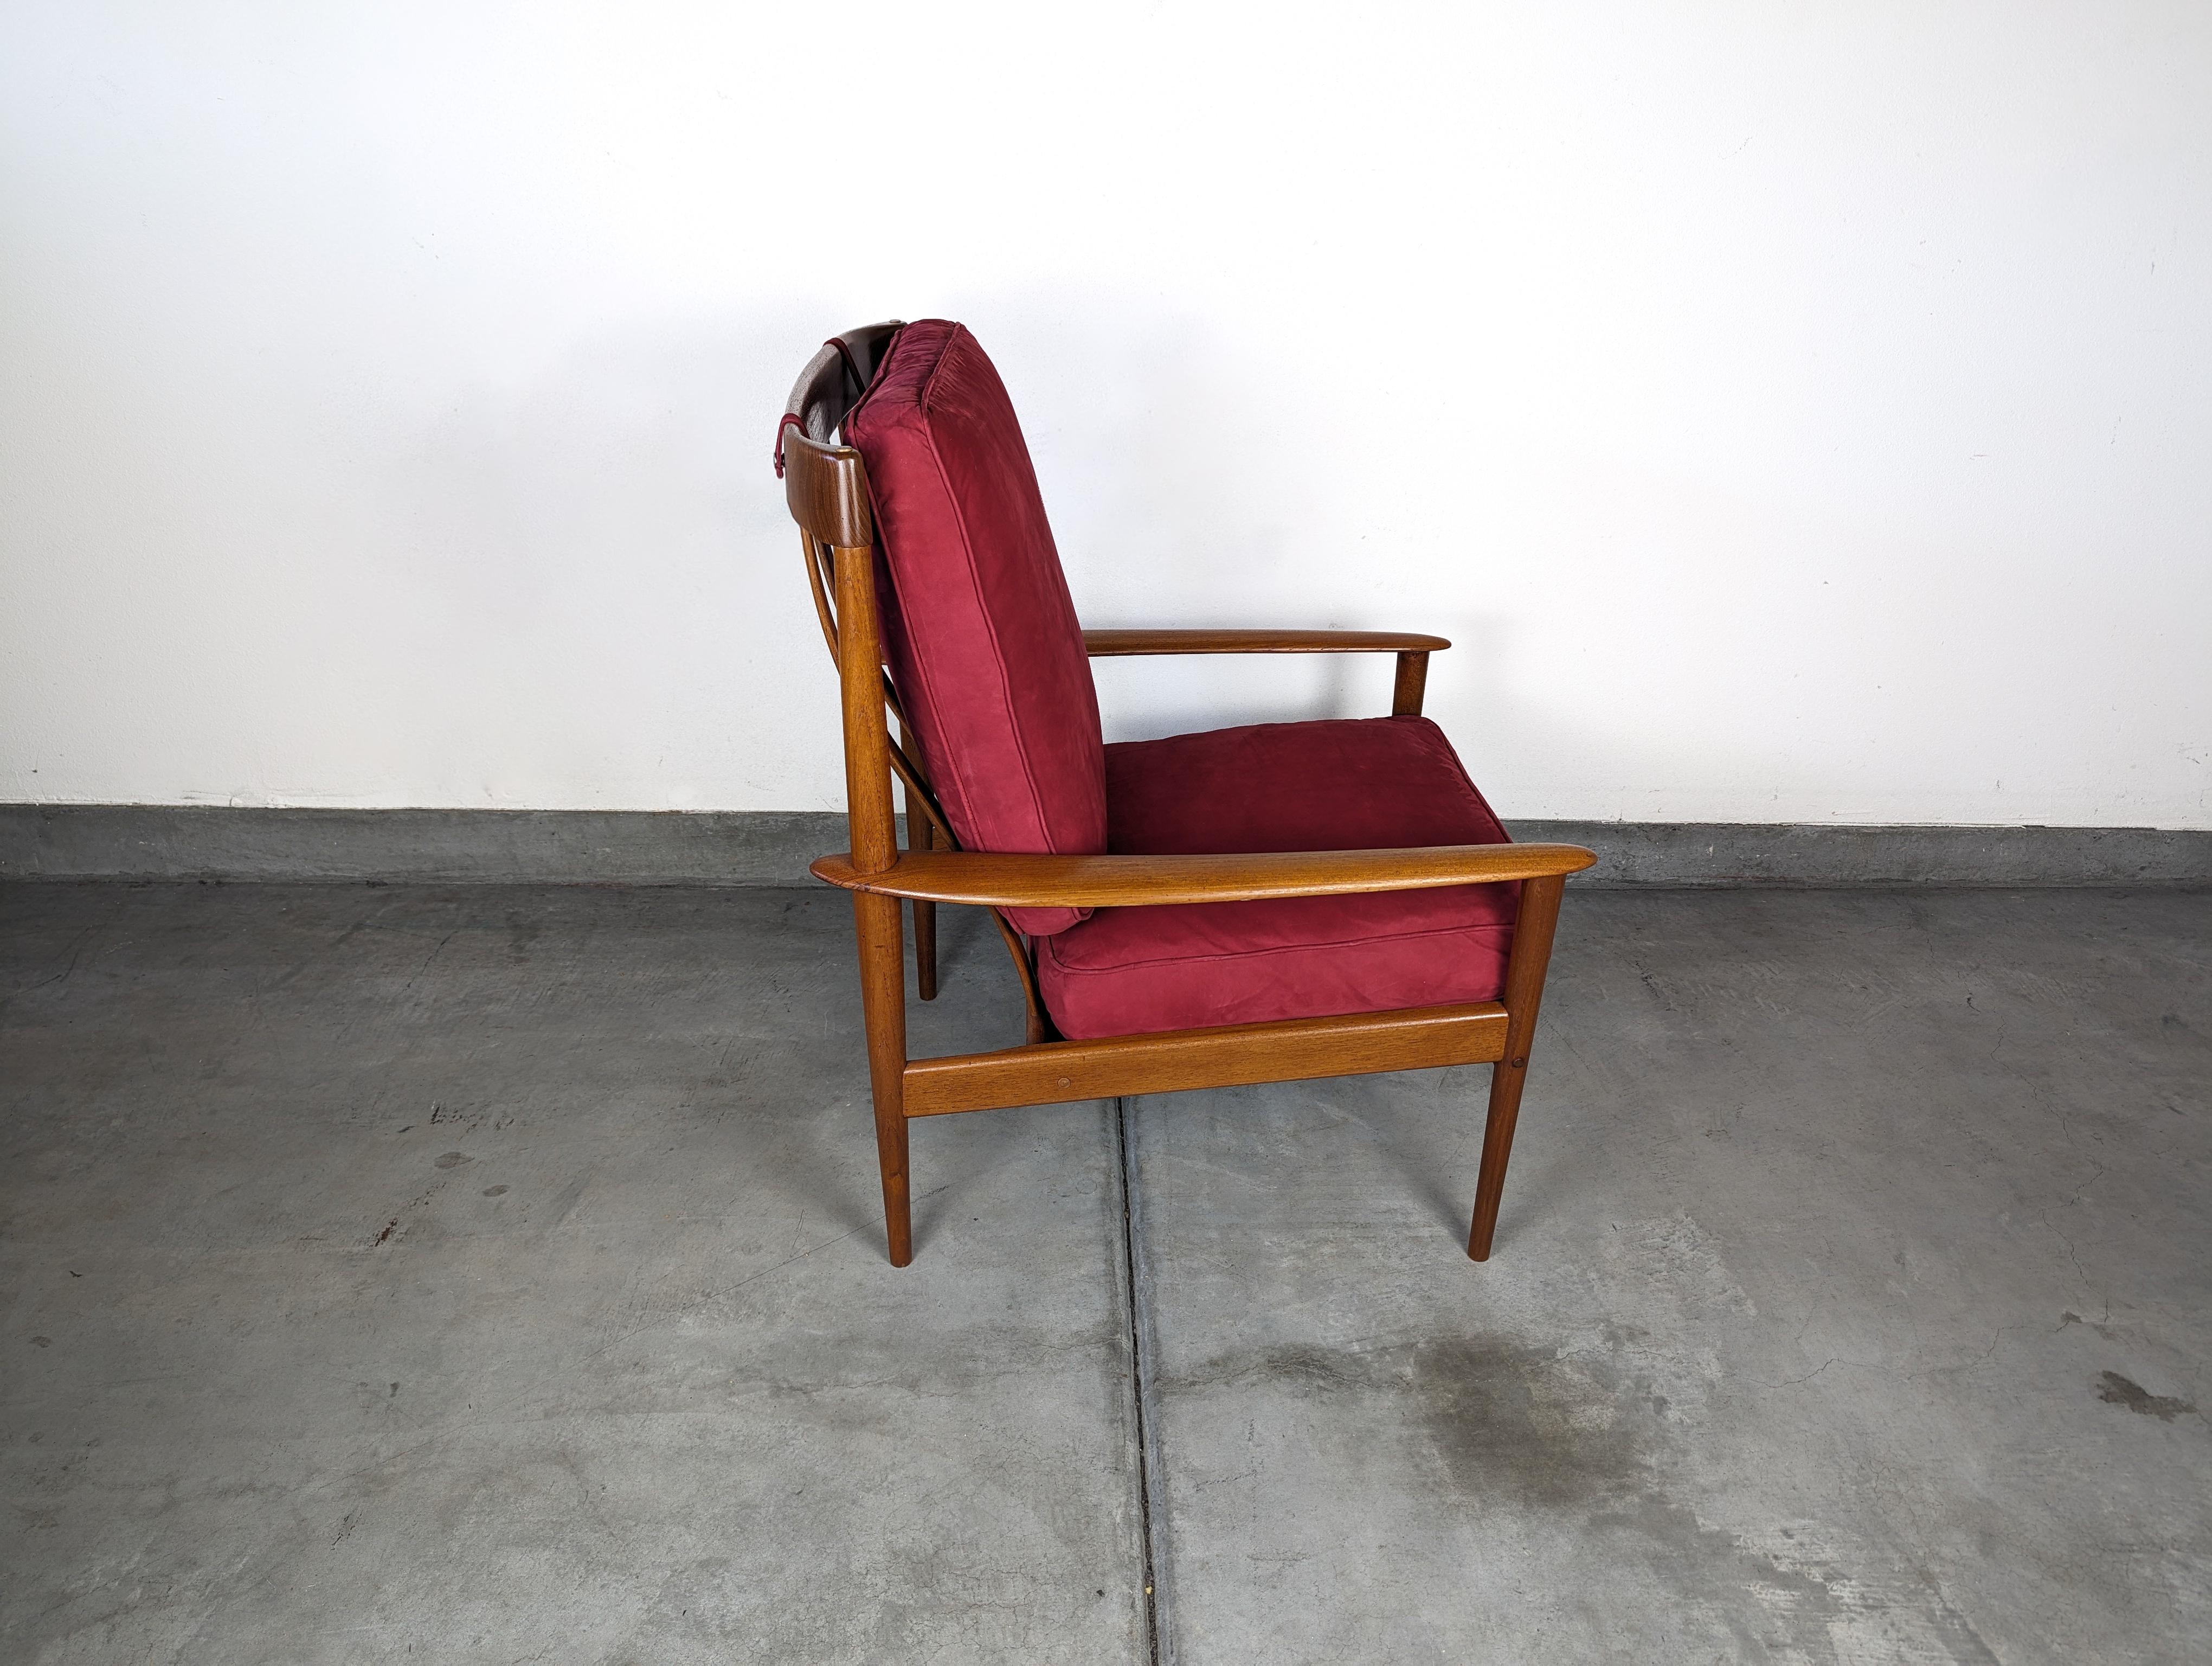 Mid-Century Modern Lounge Chair by Grete Jalk, PJ56 Highback Model, c1960s For Sale 3